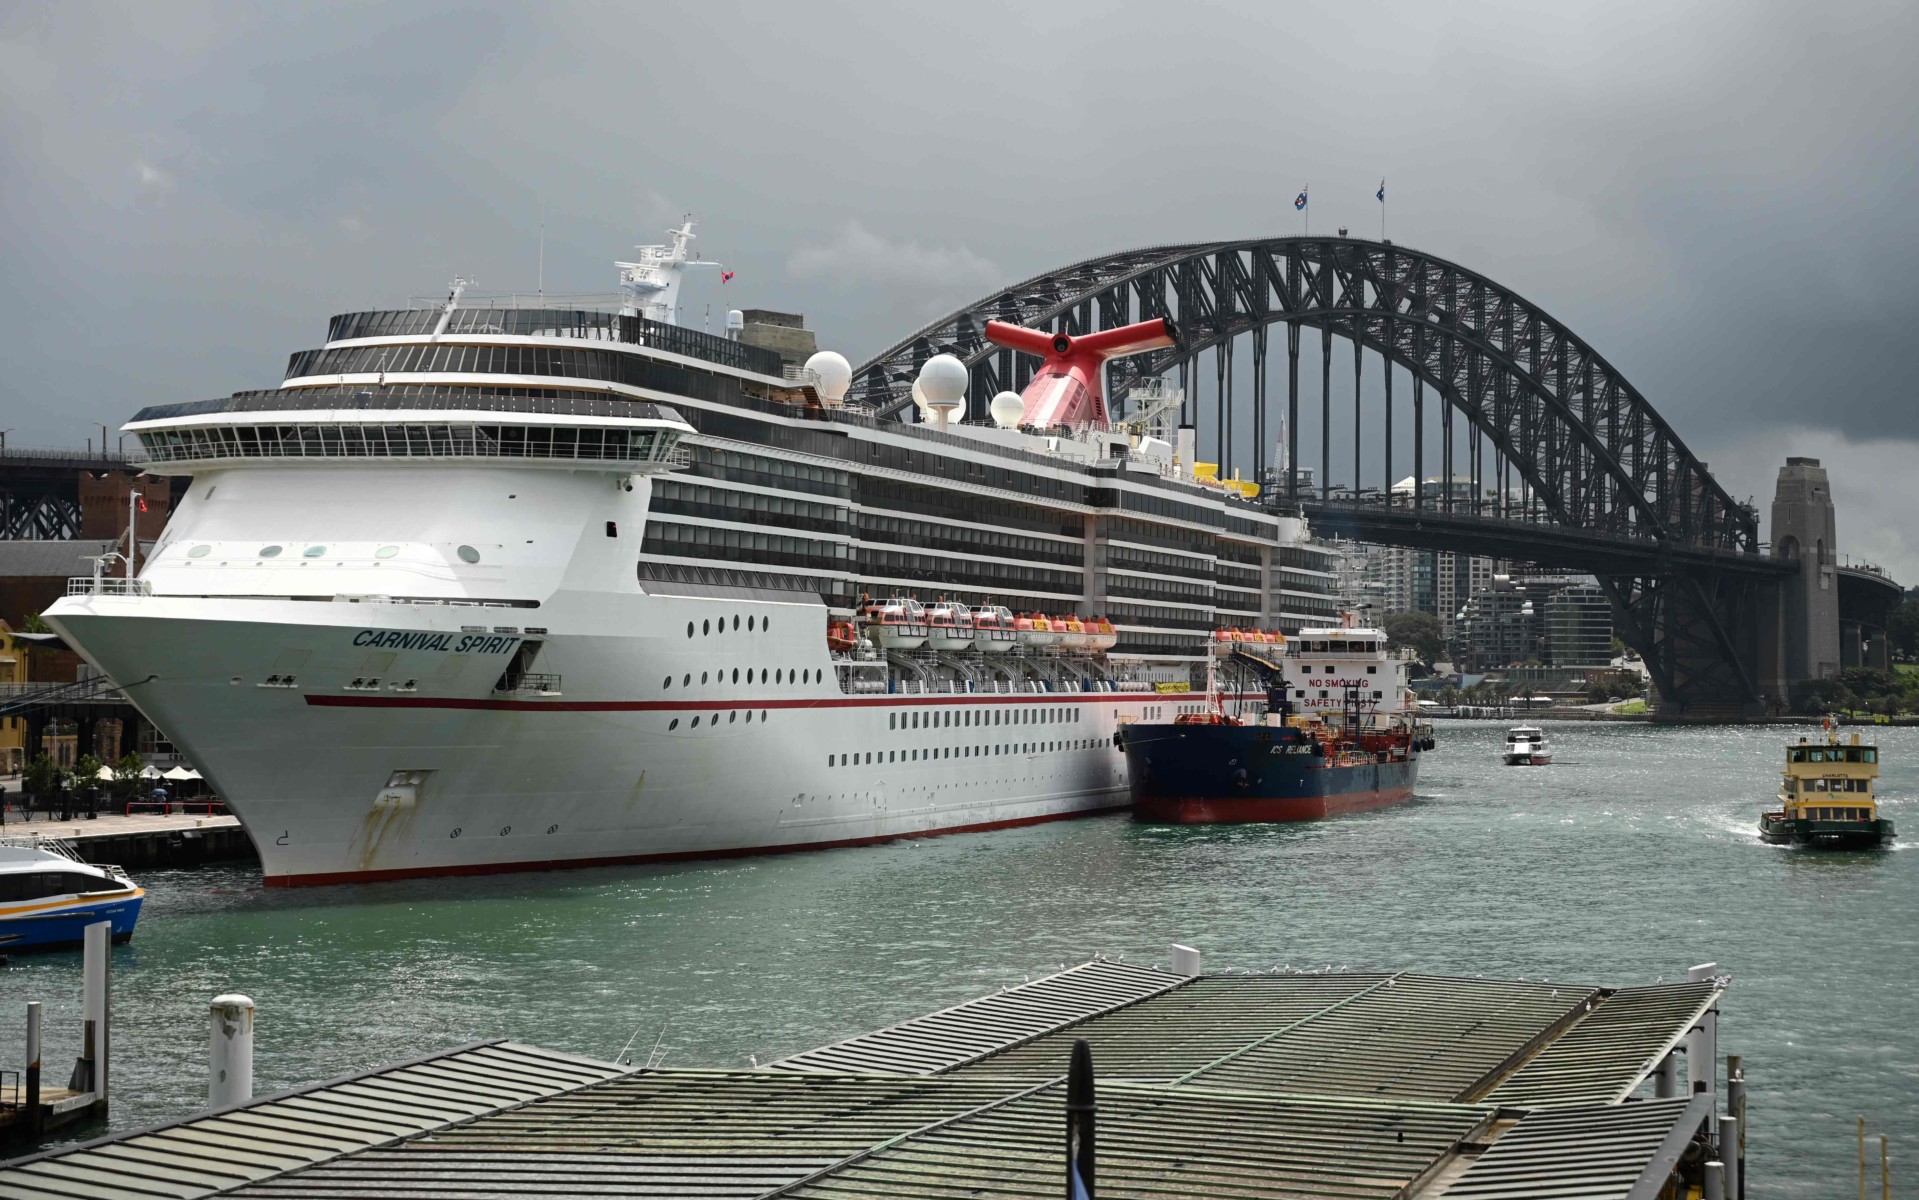 Australian Prime Minister Scott Morrison has announced all cruise ships will be banned entirely from docking in Australia 